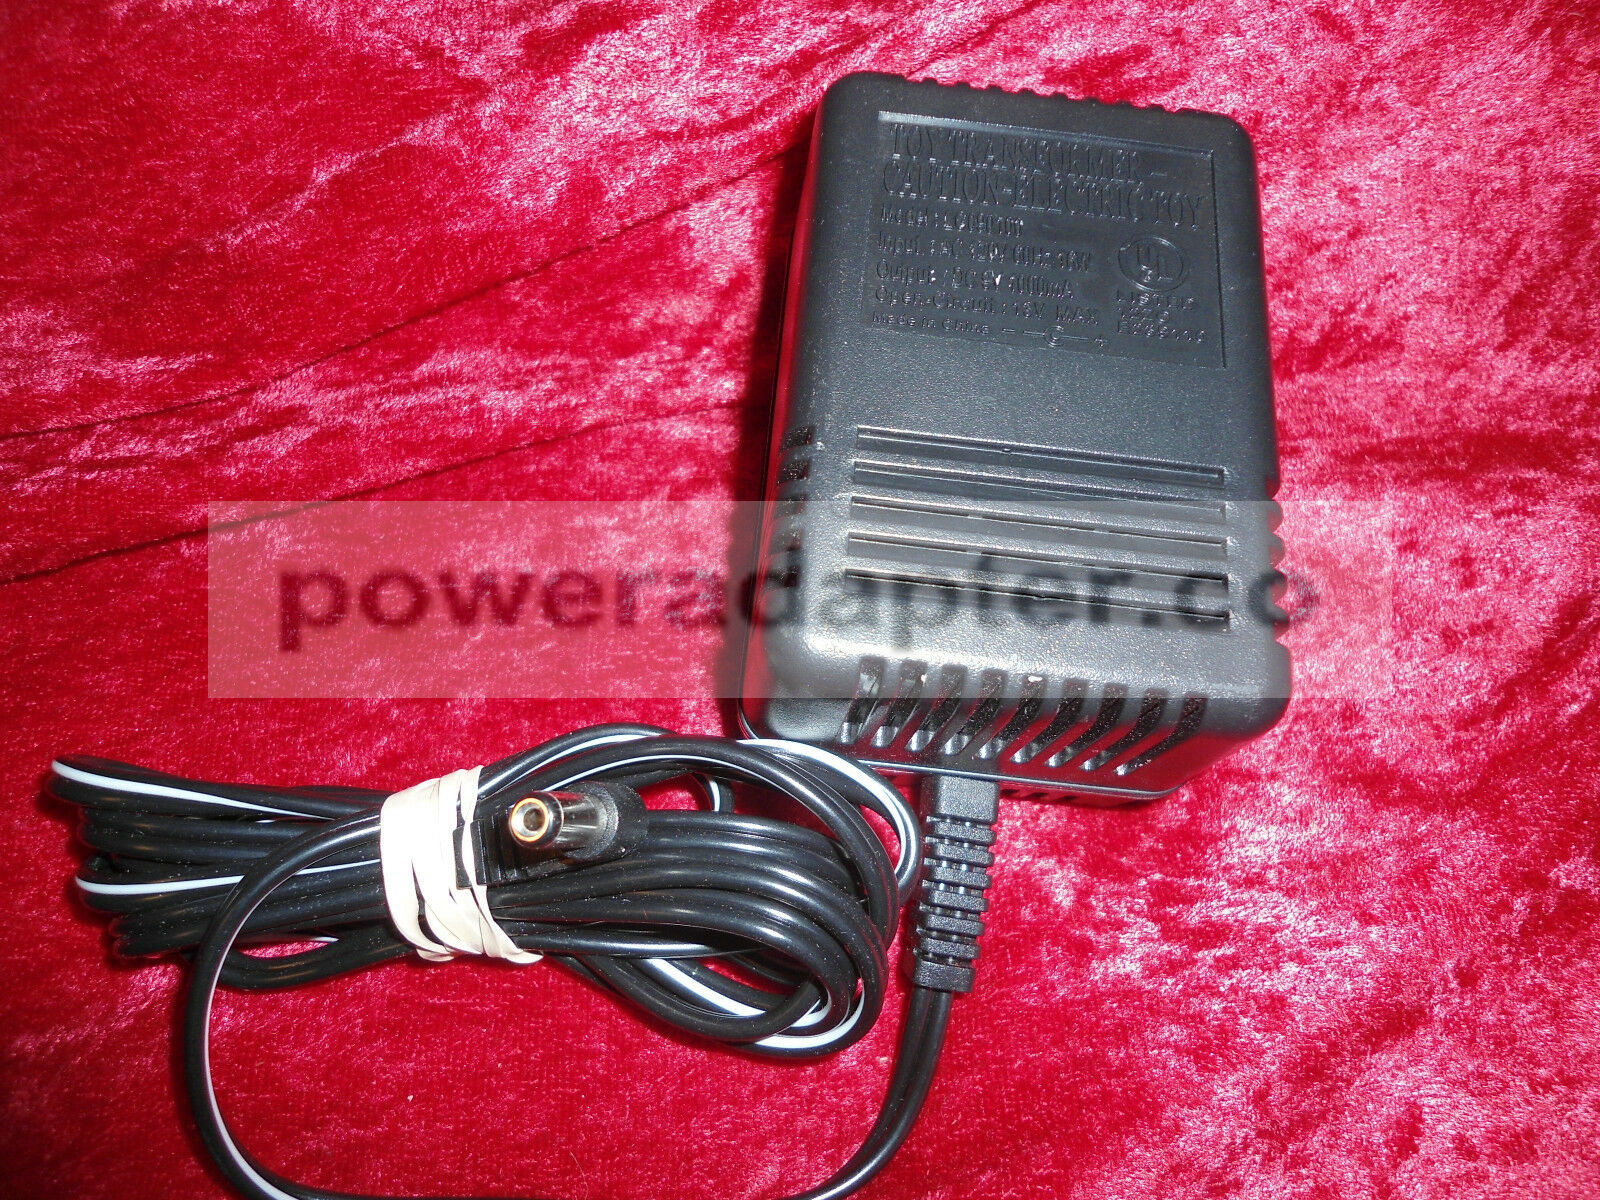 Toy Transformer LG090100 AC DC Power Adapter Output 9V 1000mA E239110 Condition: Used: An item that has been used p - Click Image to Close